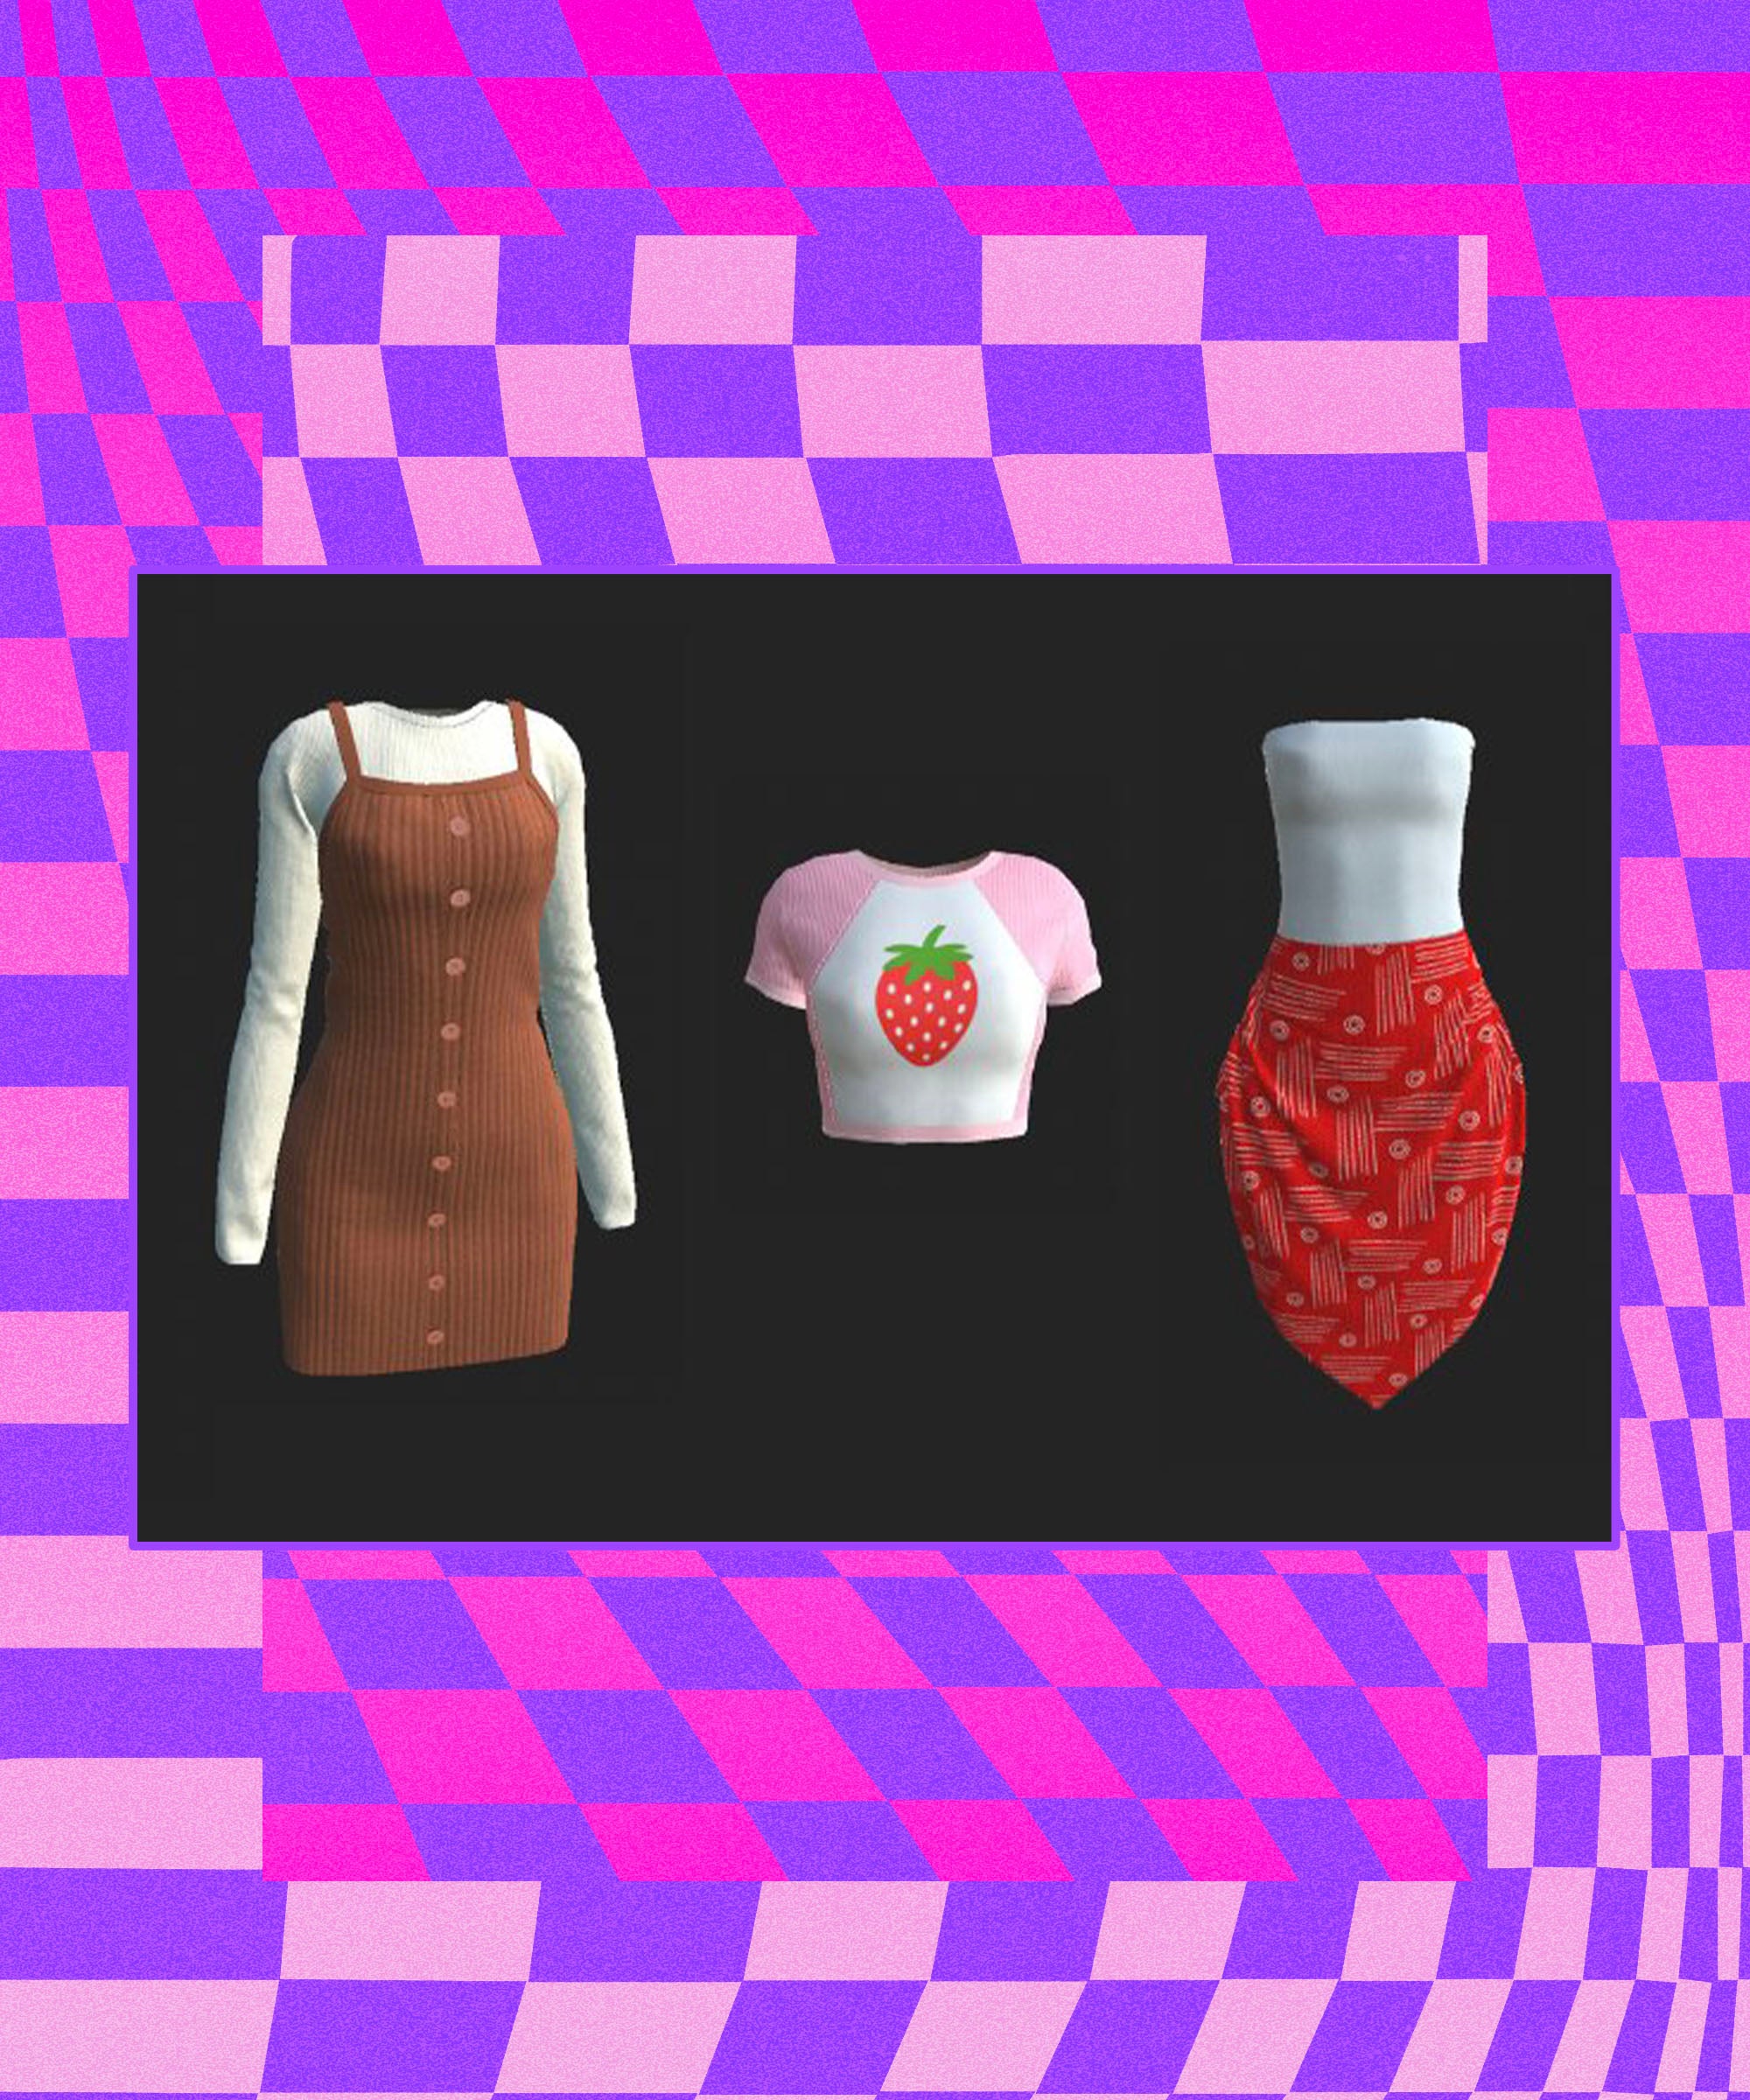 Designing Textured Clothing  ROBLOX Clothing Tutorial 